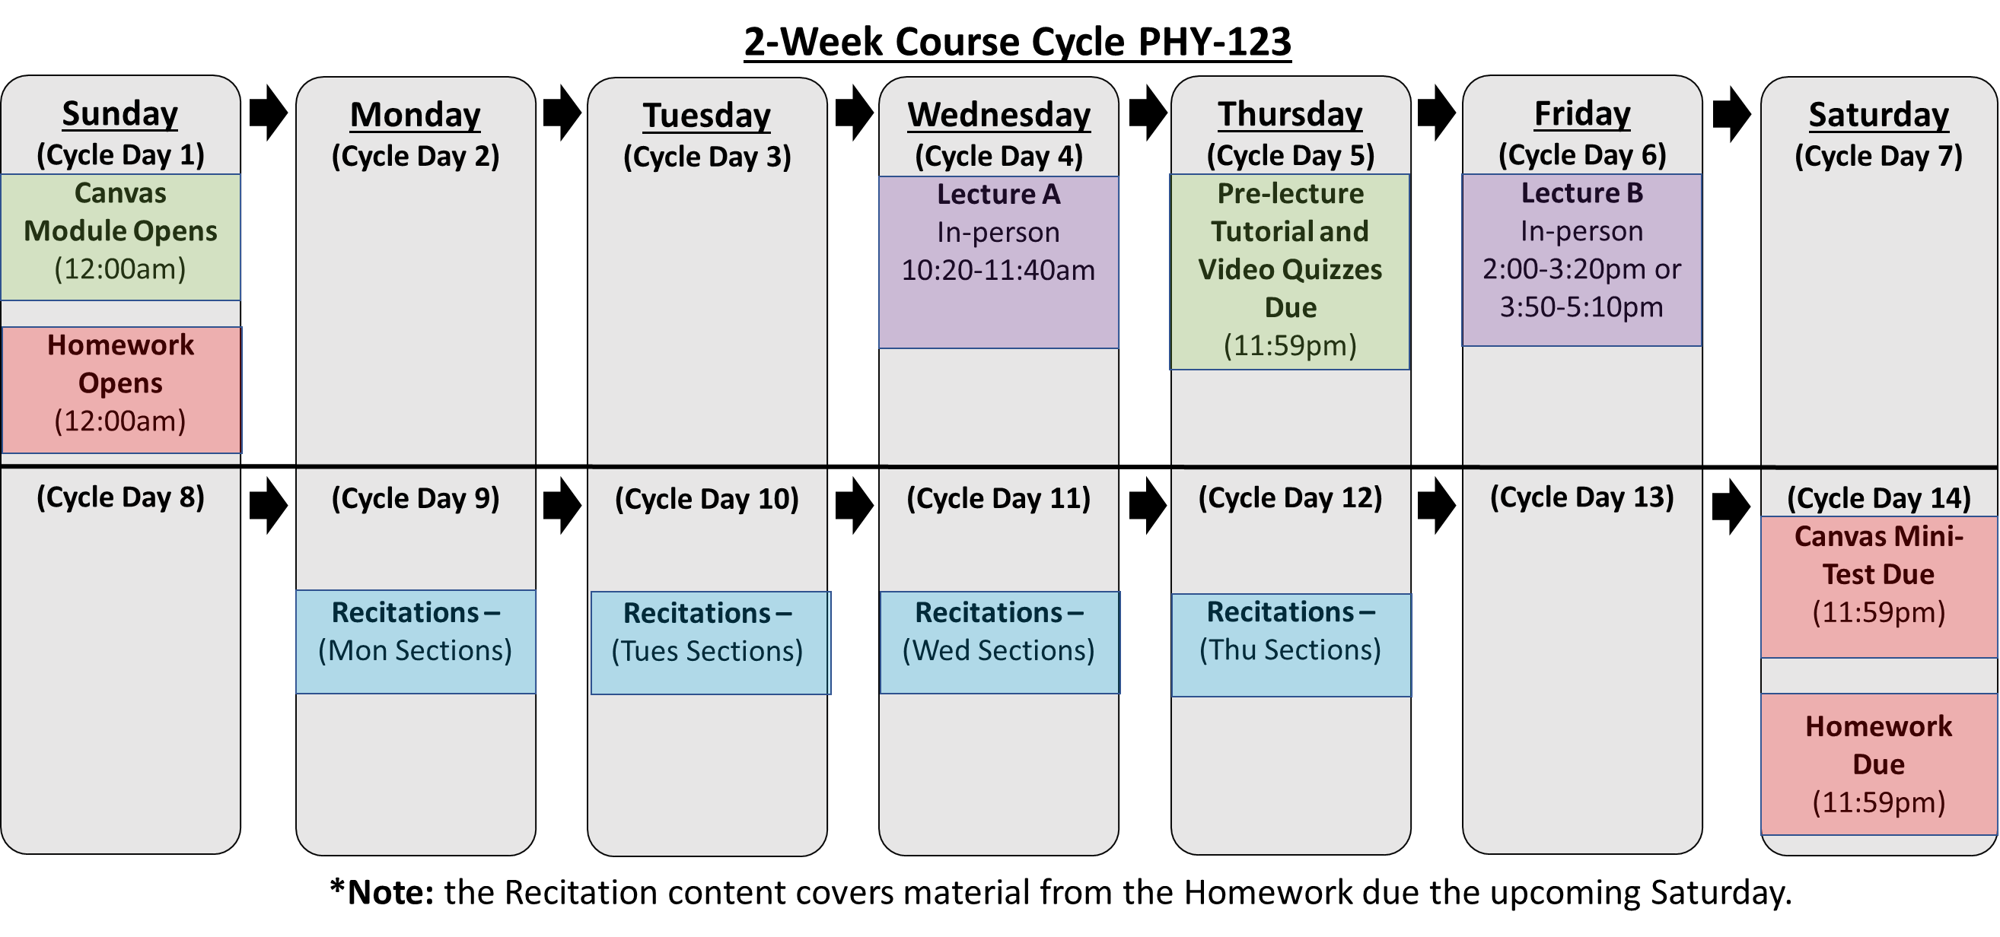 Weekly Cycle Day-by-Day Activities.png